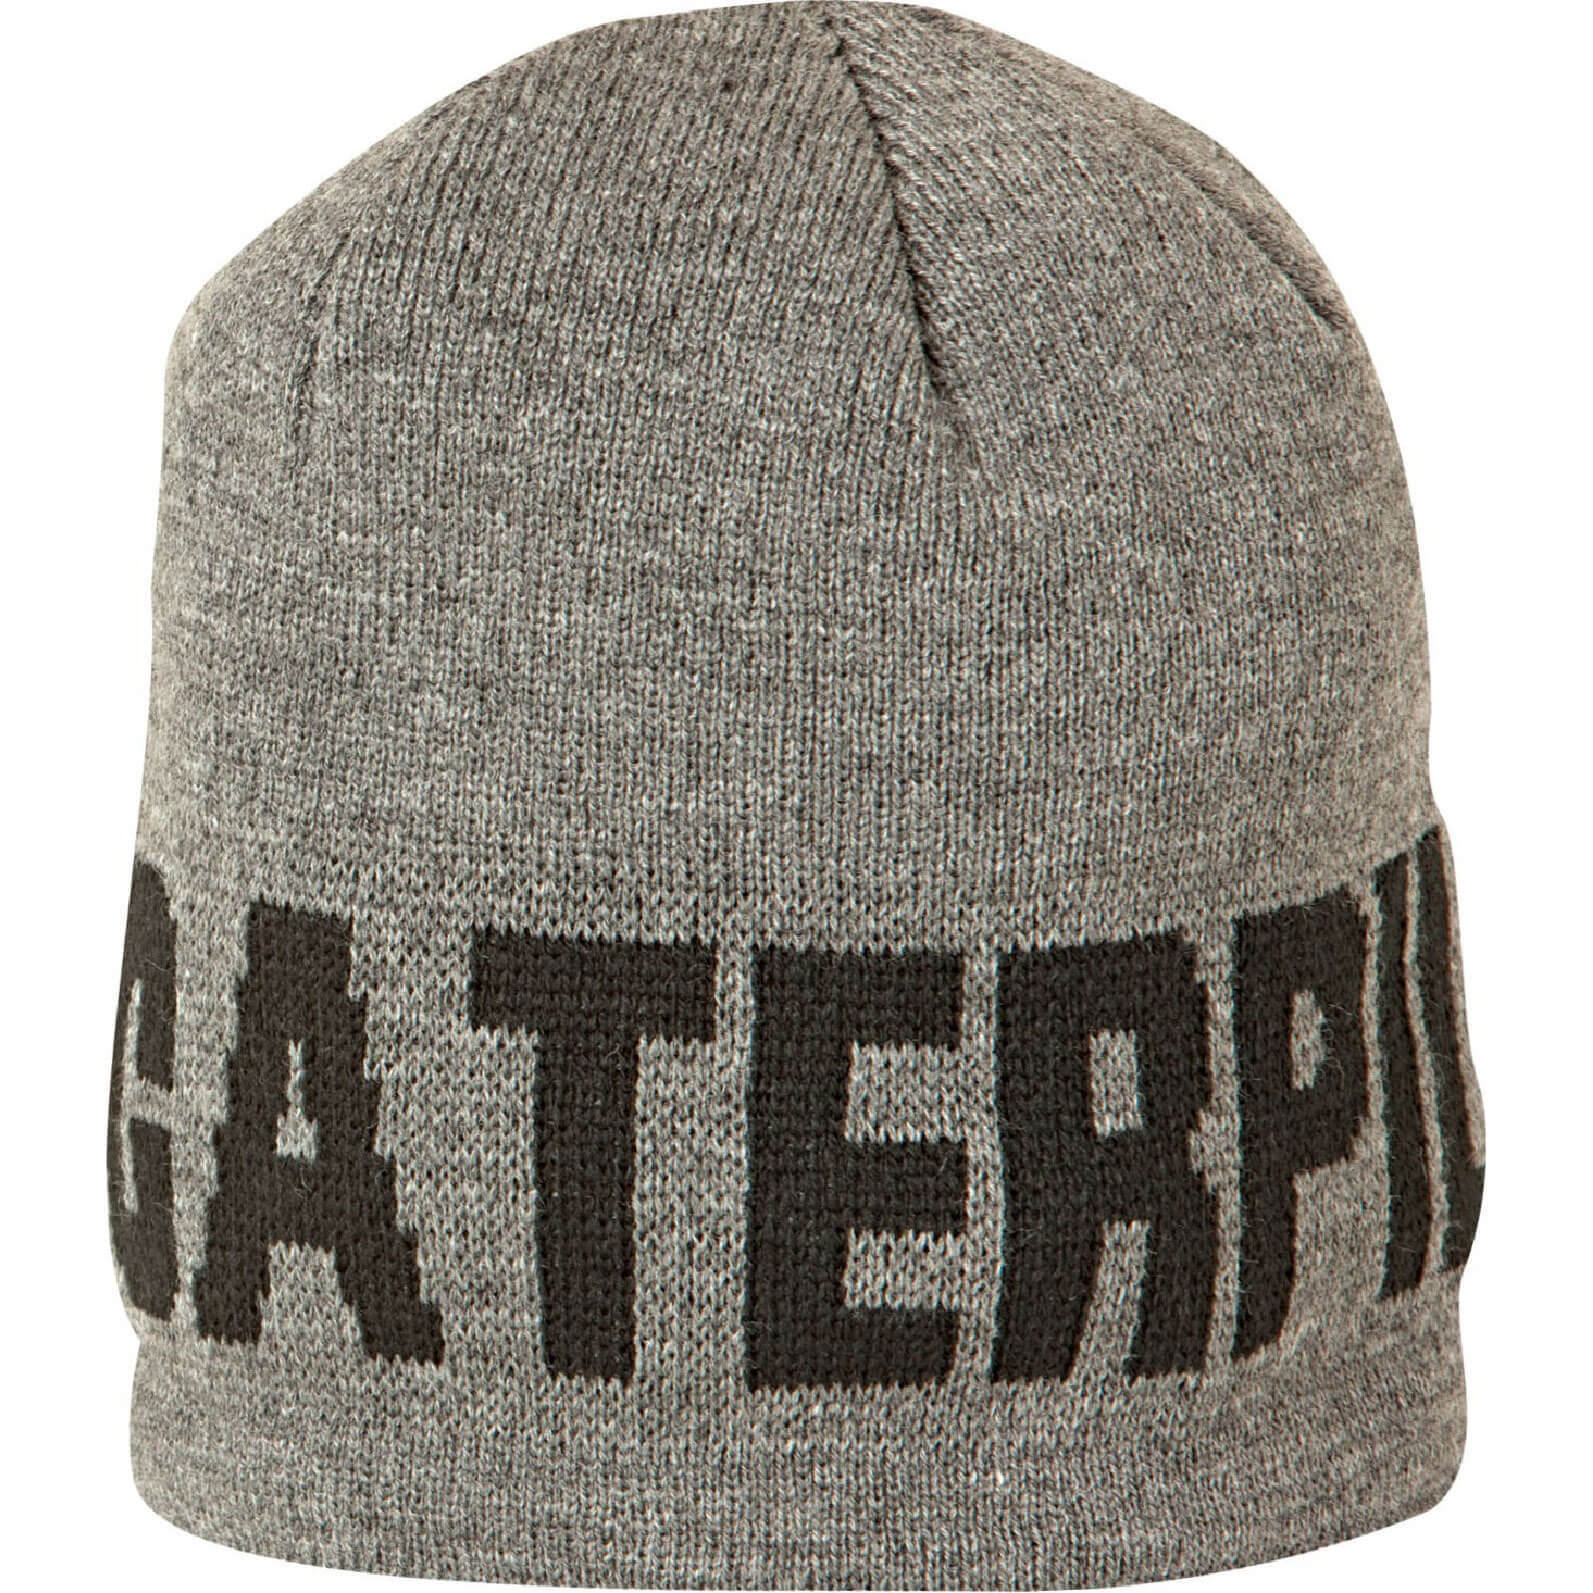 Image of Caterpillar Branded Beanie Cap Grey One Size